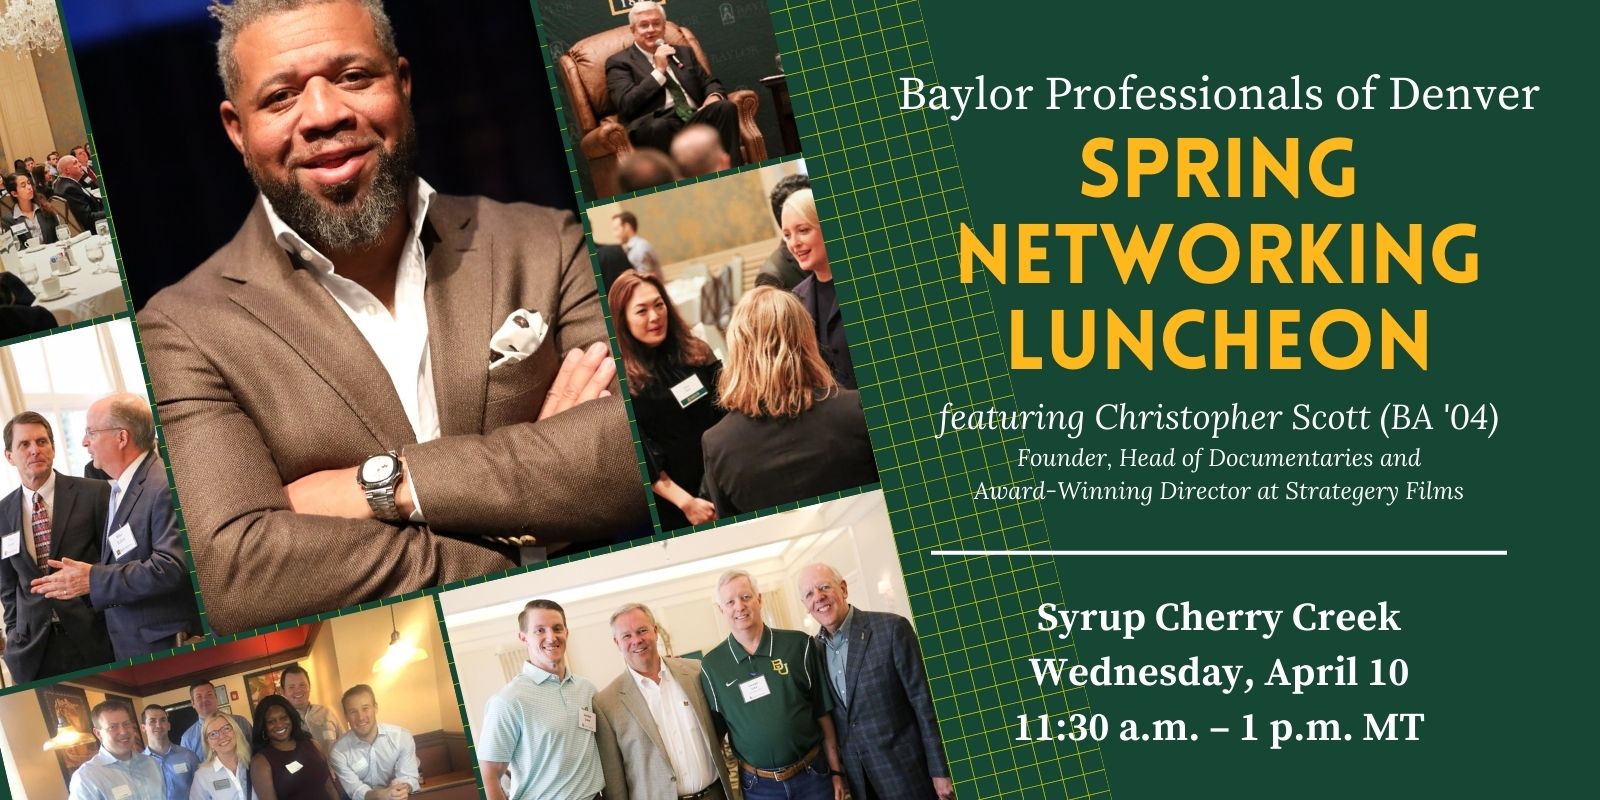 Baylor Professionals of Denver Spring Networking Luncheon featuring Christopher Scott (BA '04) | Syrup Cherry Creek | Wednesday, April 10 | 11:30 a.m. – 1 p.m. MT